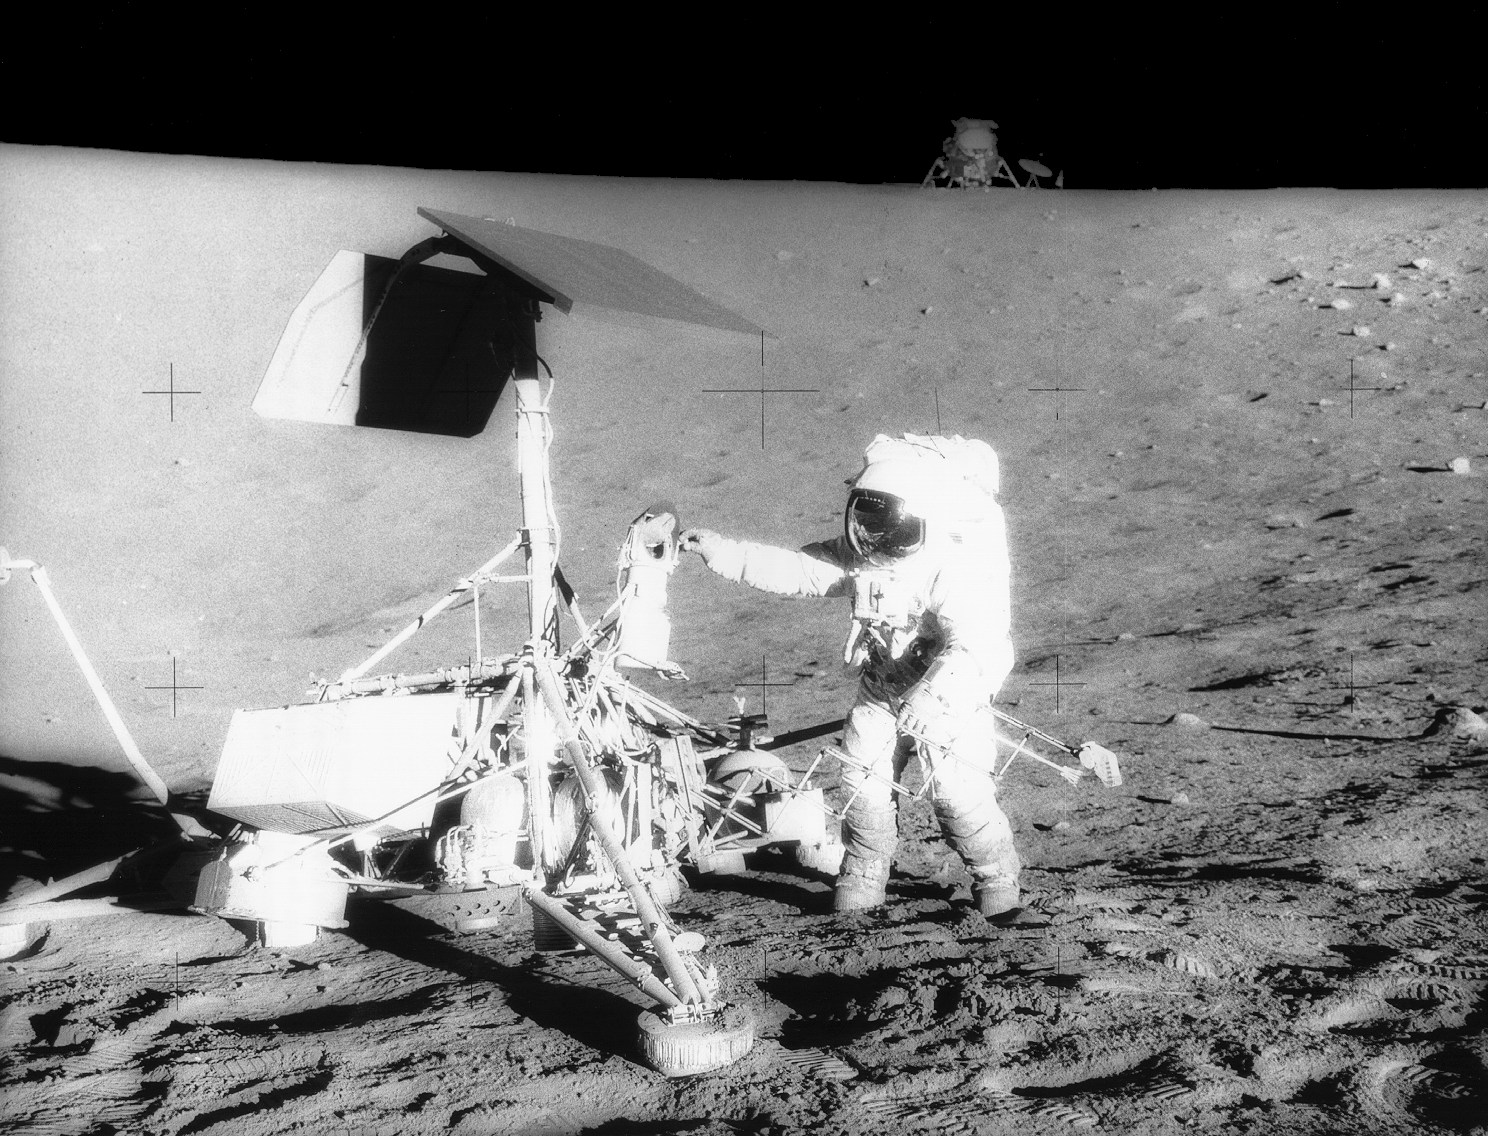 Microbes were found on a spacecraft called Surveyor 3, which was on the moon for 2.5 years when Apollo 12 took samples back to Earth. The result, however, could have come from post-mission contamination in the lab. Image courtesy NASA. For a larger version of this image please go here.